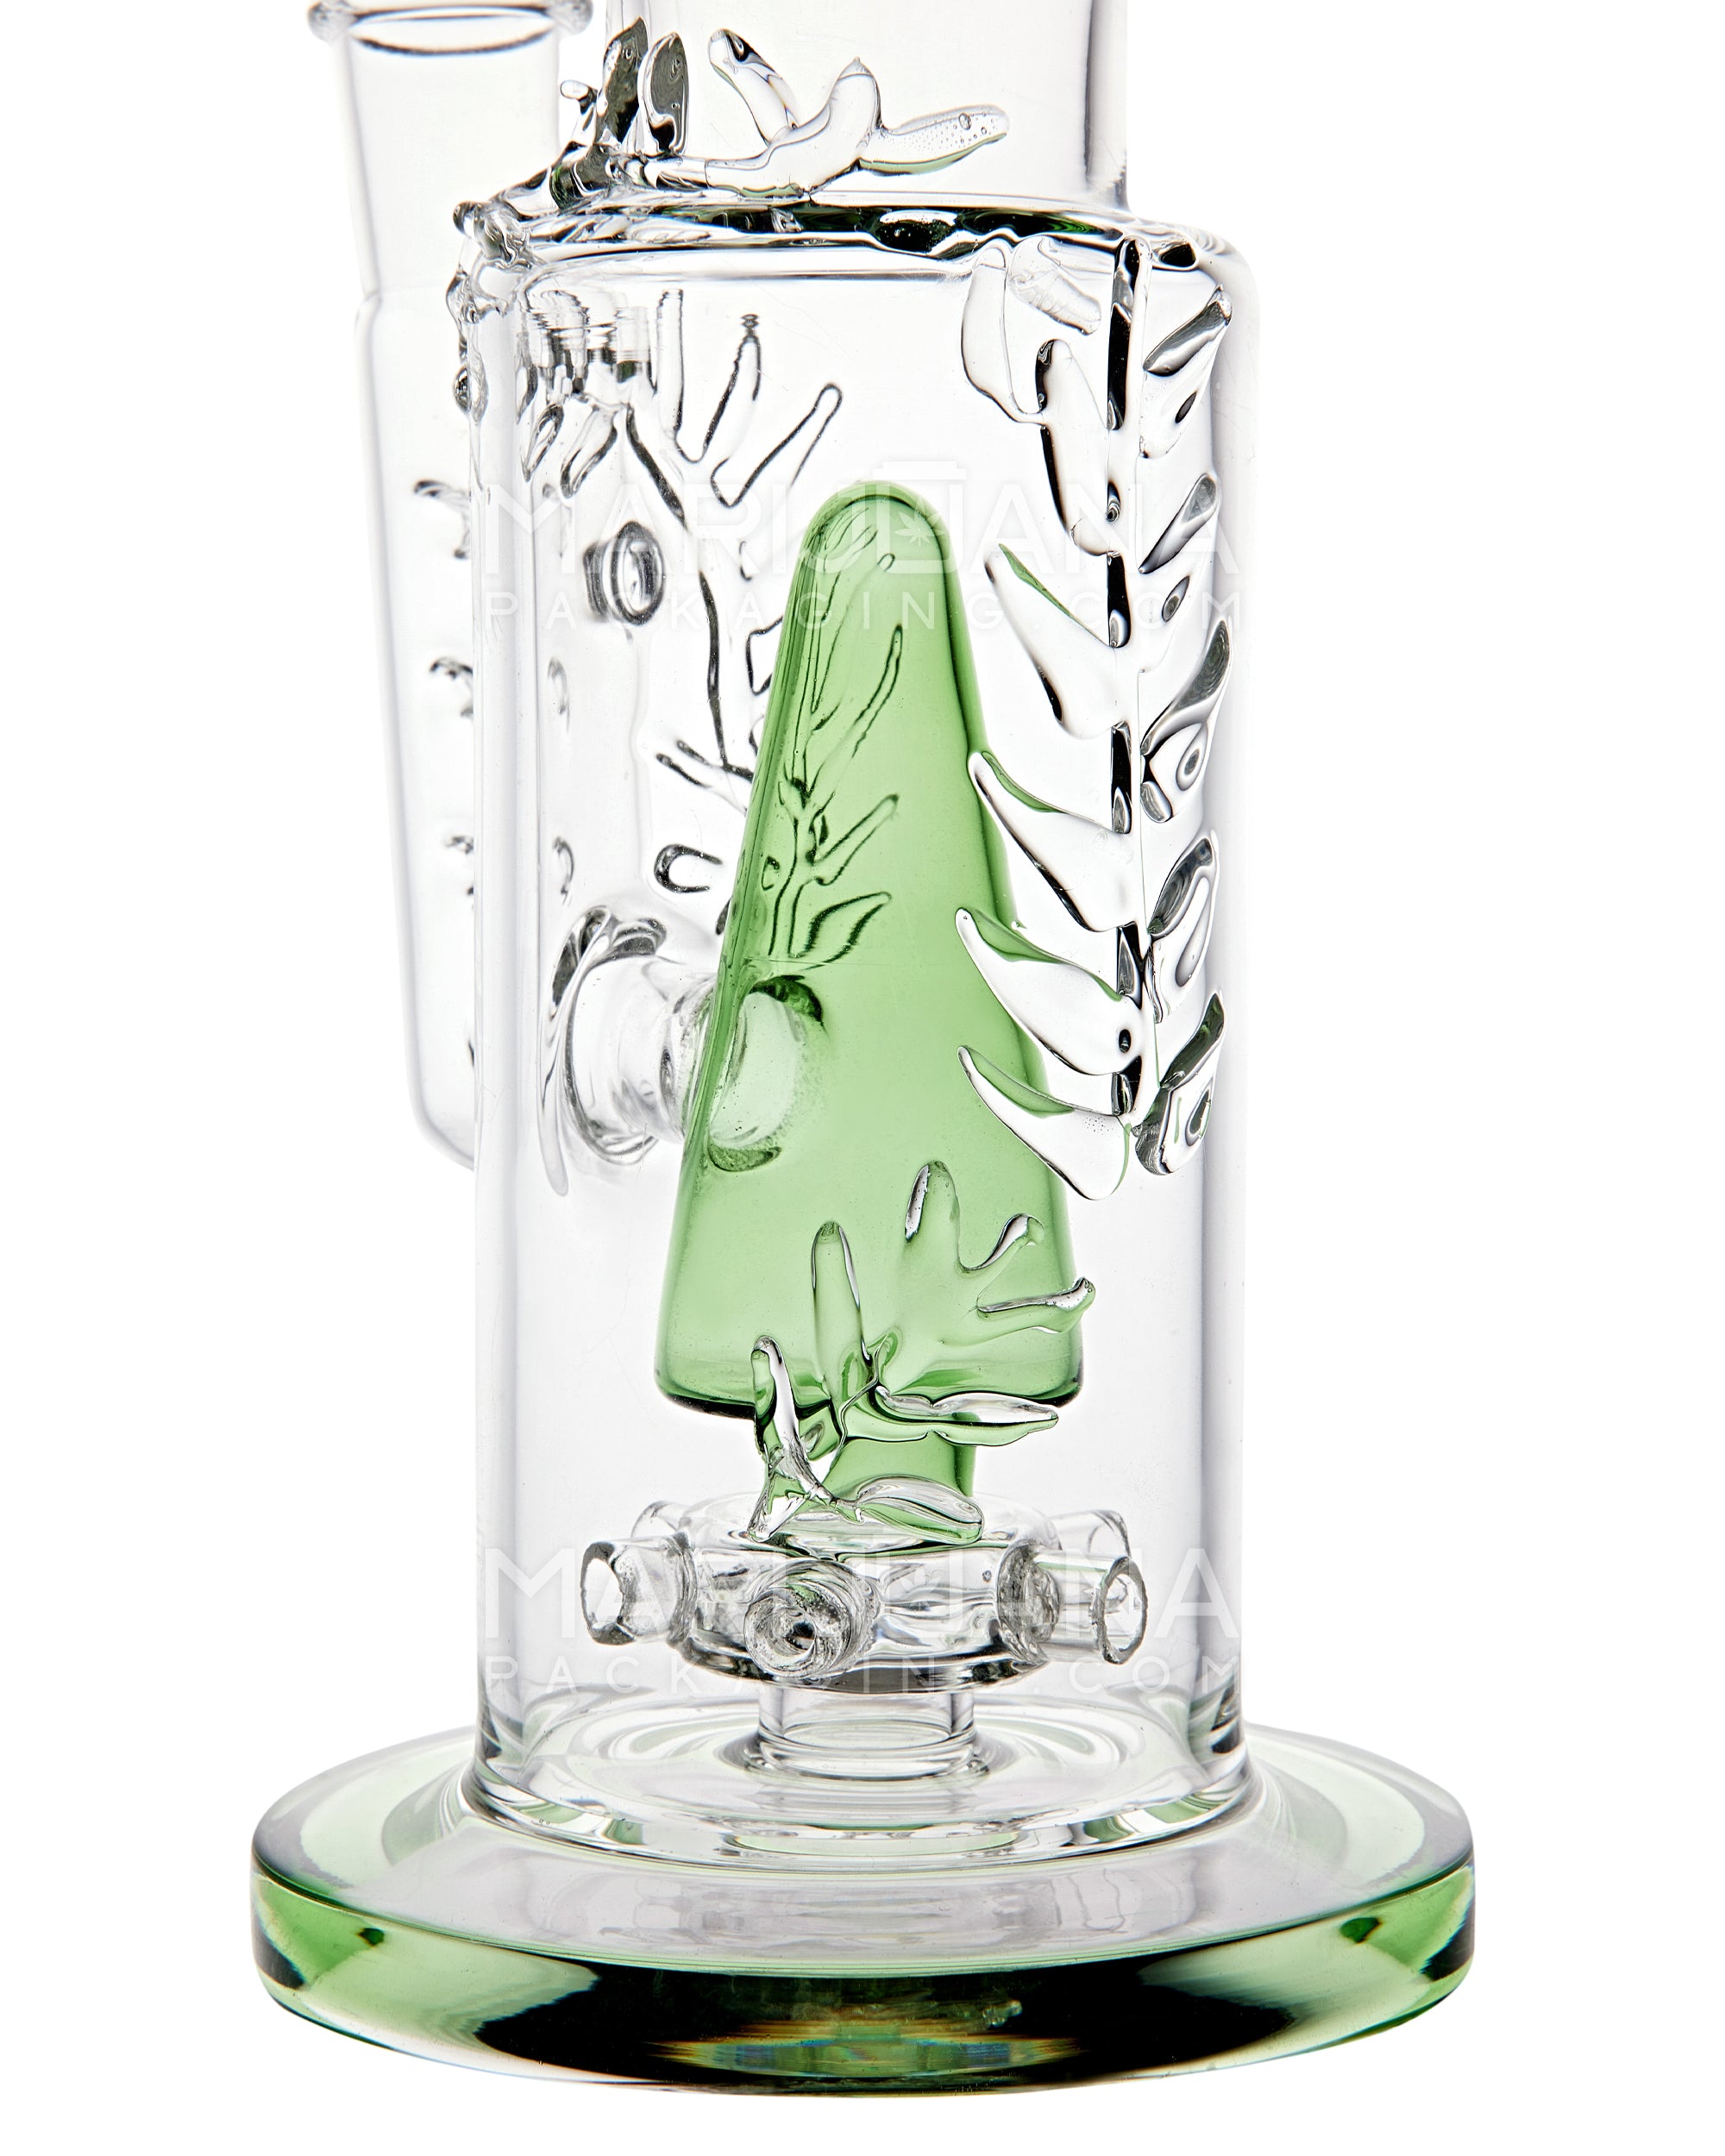 Straight Neck Showerhead Perc Olive Branch Glass Water Pipe w/ Ice Catcher & Thick Base | 15in Tall - 18mm Bowl - Green - 3